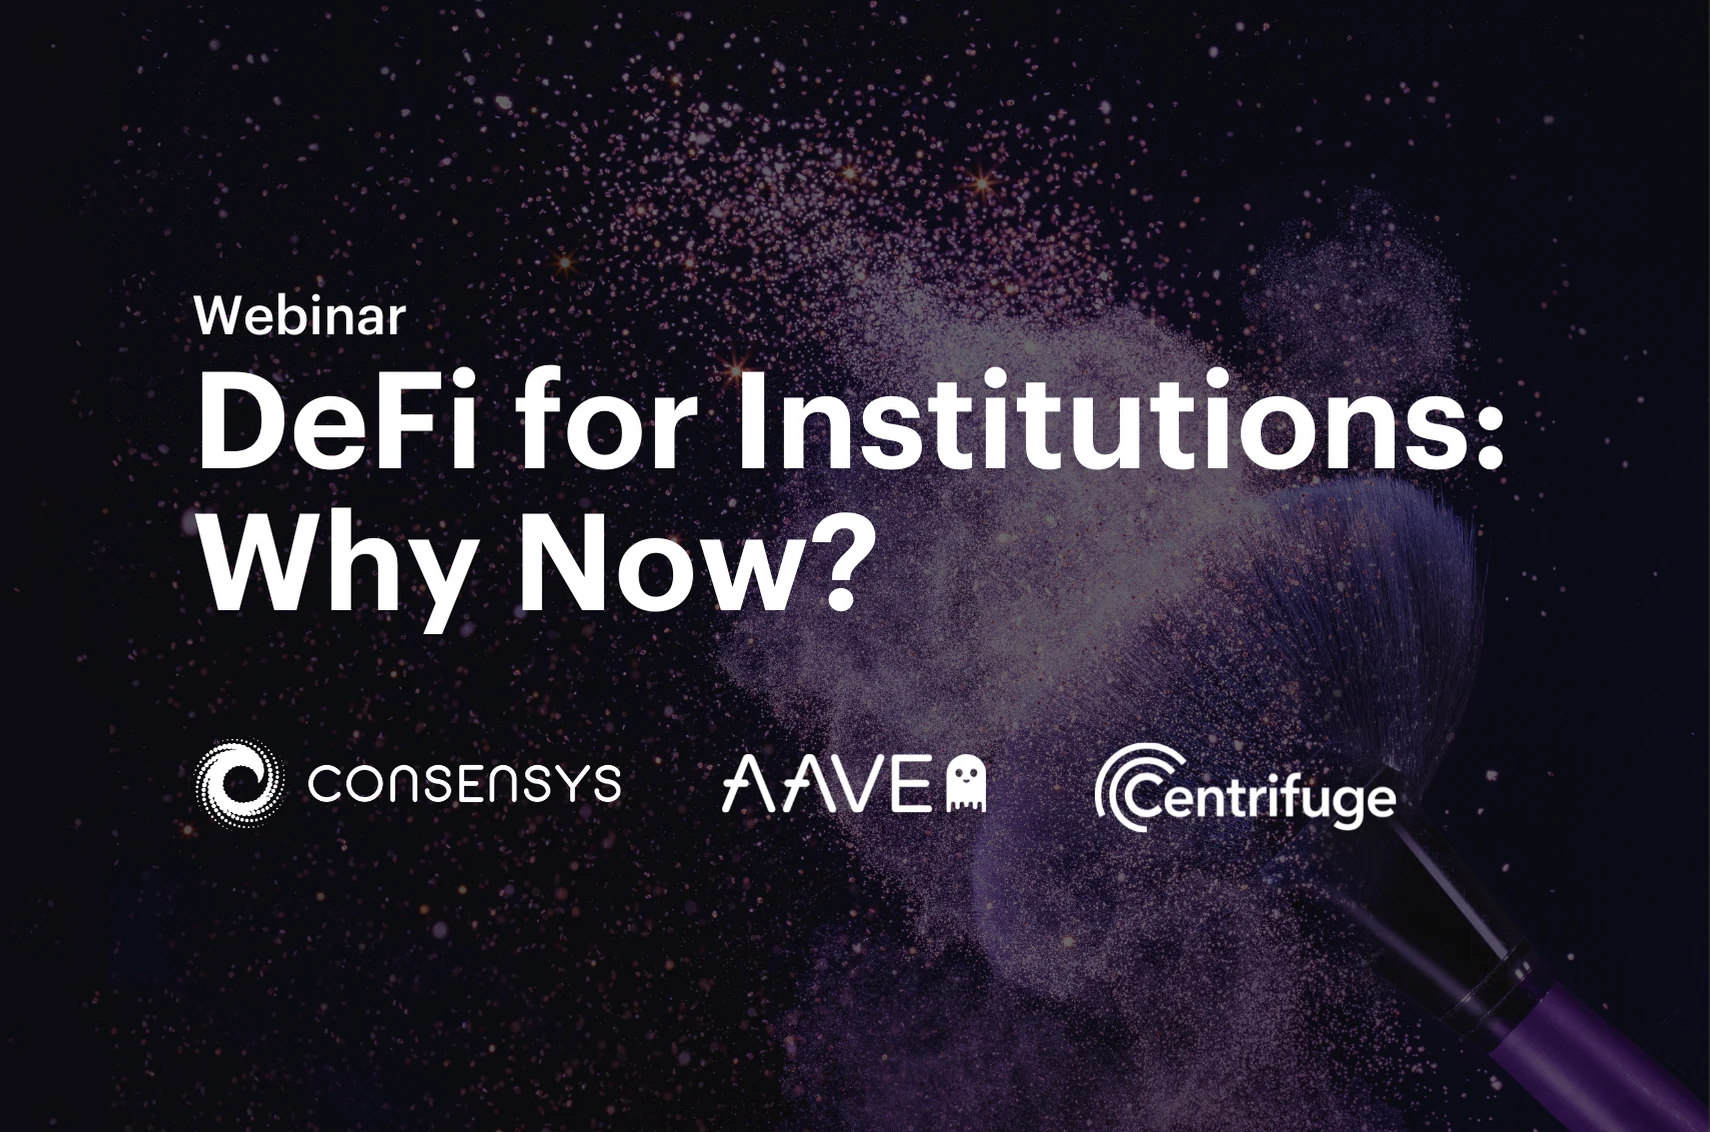 DeFi for Institutions. Why Now?